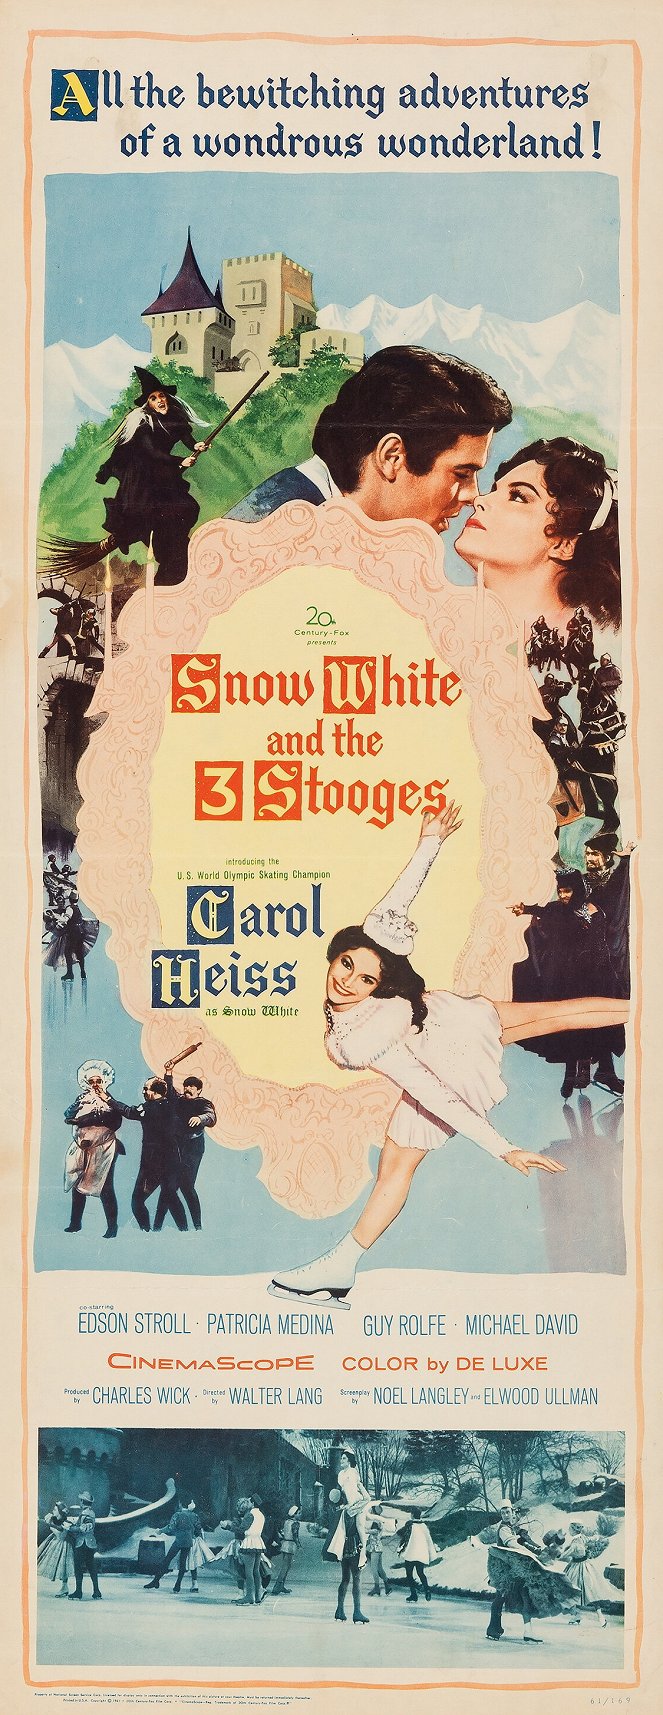 Snow White and the Three Stooges - Carteles